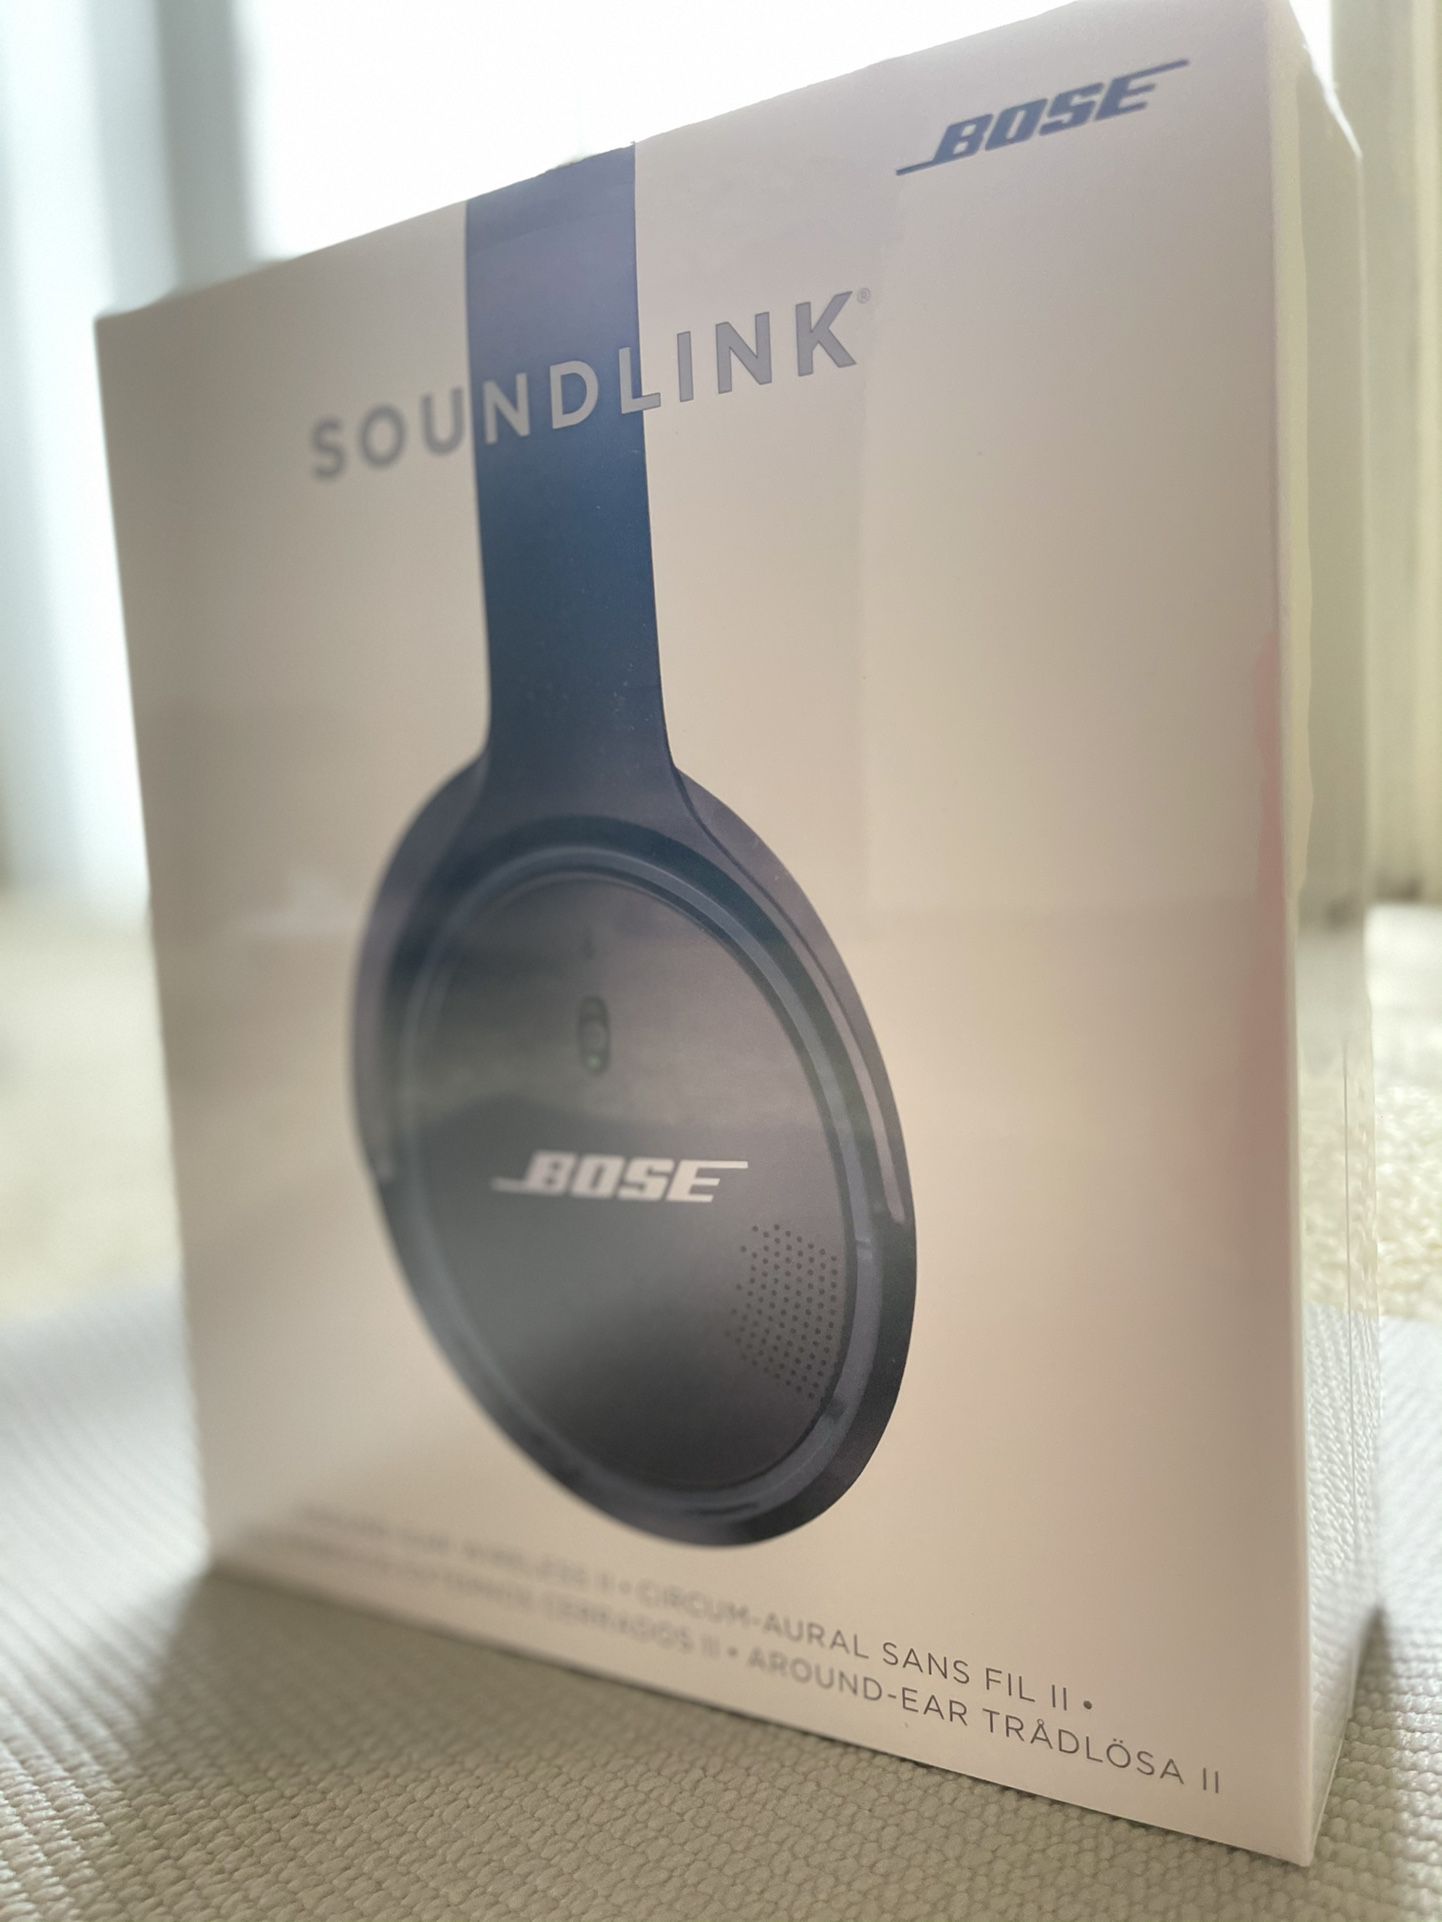 Brand Bose Soundlink Headphones 2 in wrapping for Sale in St. Louis, MO - OfferUp